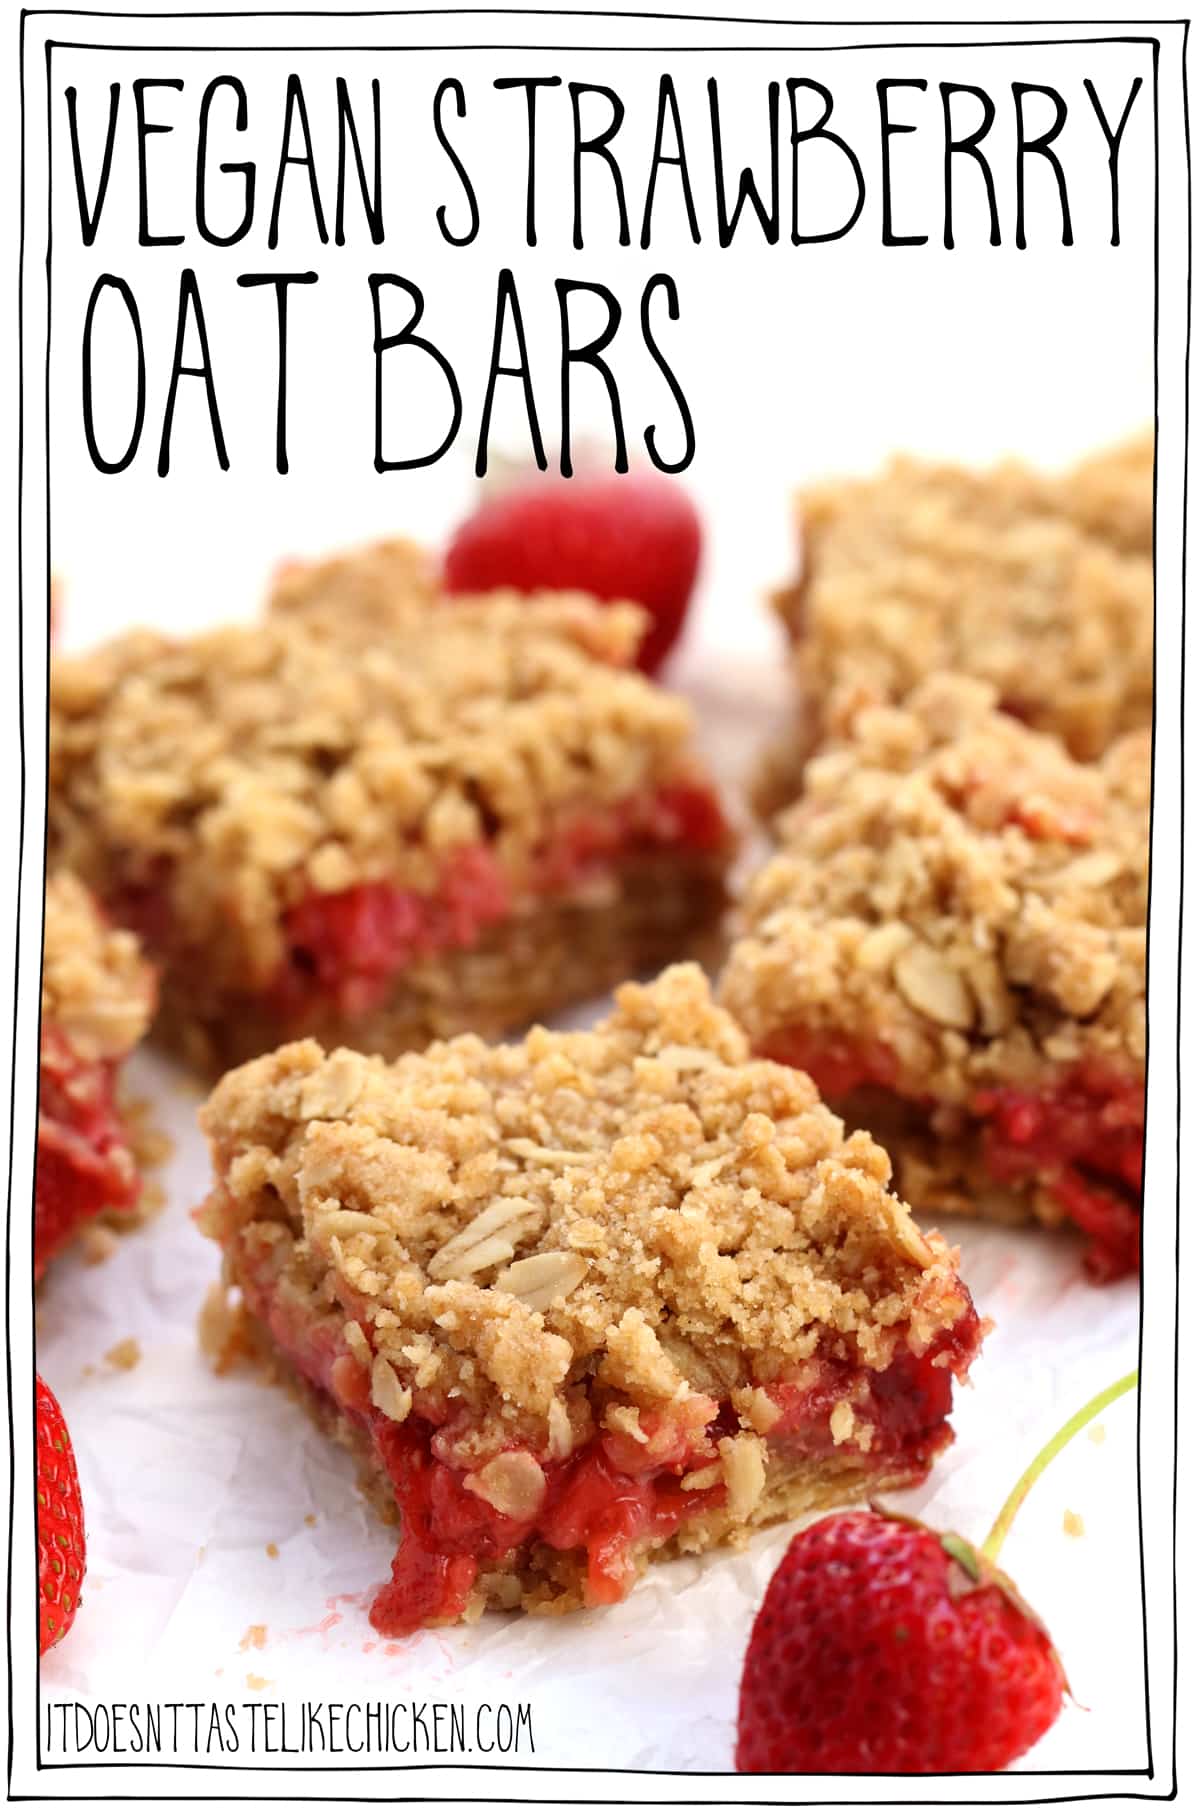 Vegan Strawberry Oat Bars! Sweet gooey strawberry filling surrounded by crumbly oatmeal cookie pastry, these old fashioned bars are summer dessert perfection! #itdoesnttastelikechicken #veganrecipe #vegandessert